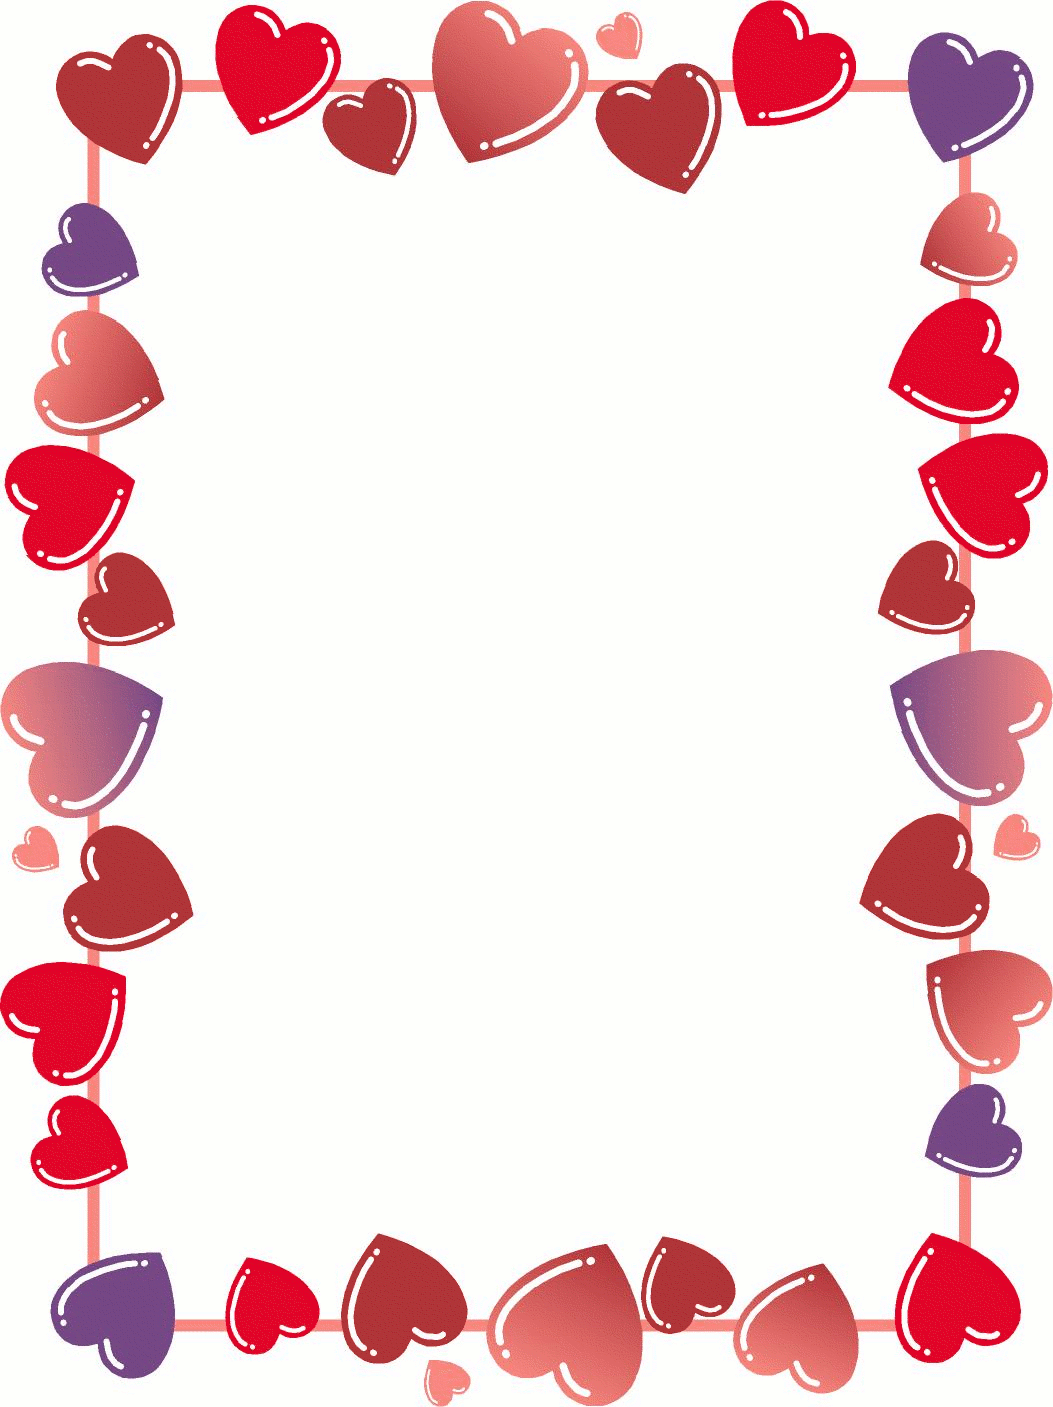 free-heart-border-for-word-download-free-heart-border-for-word-png